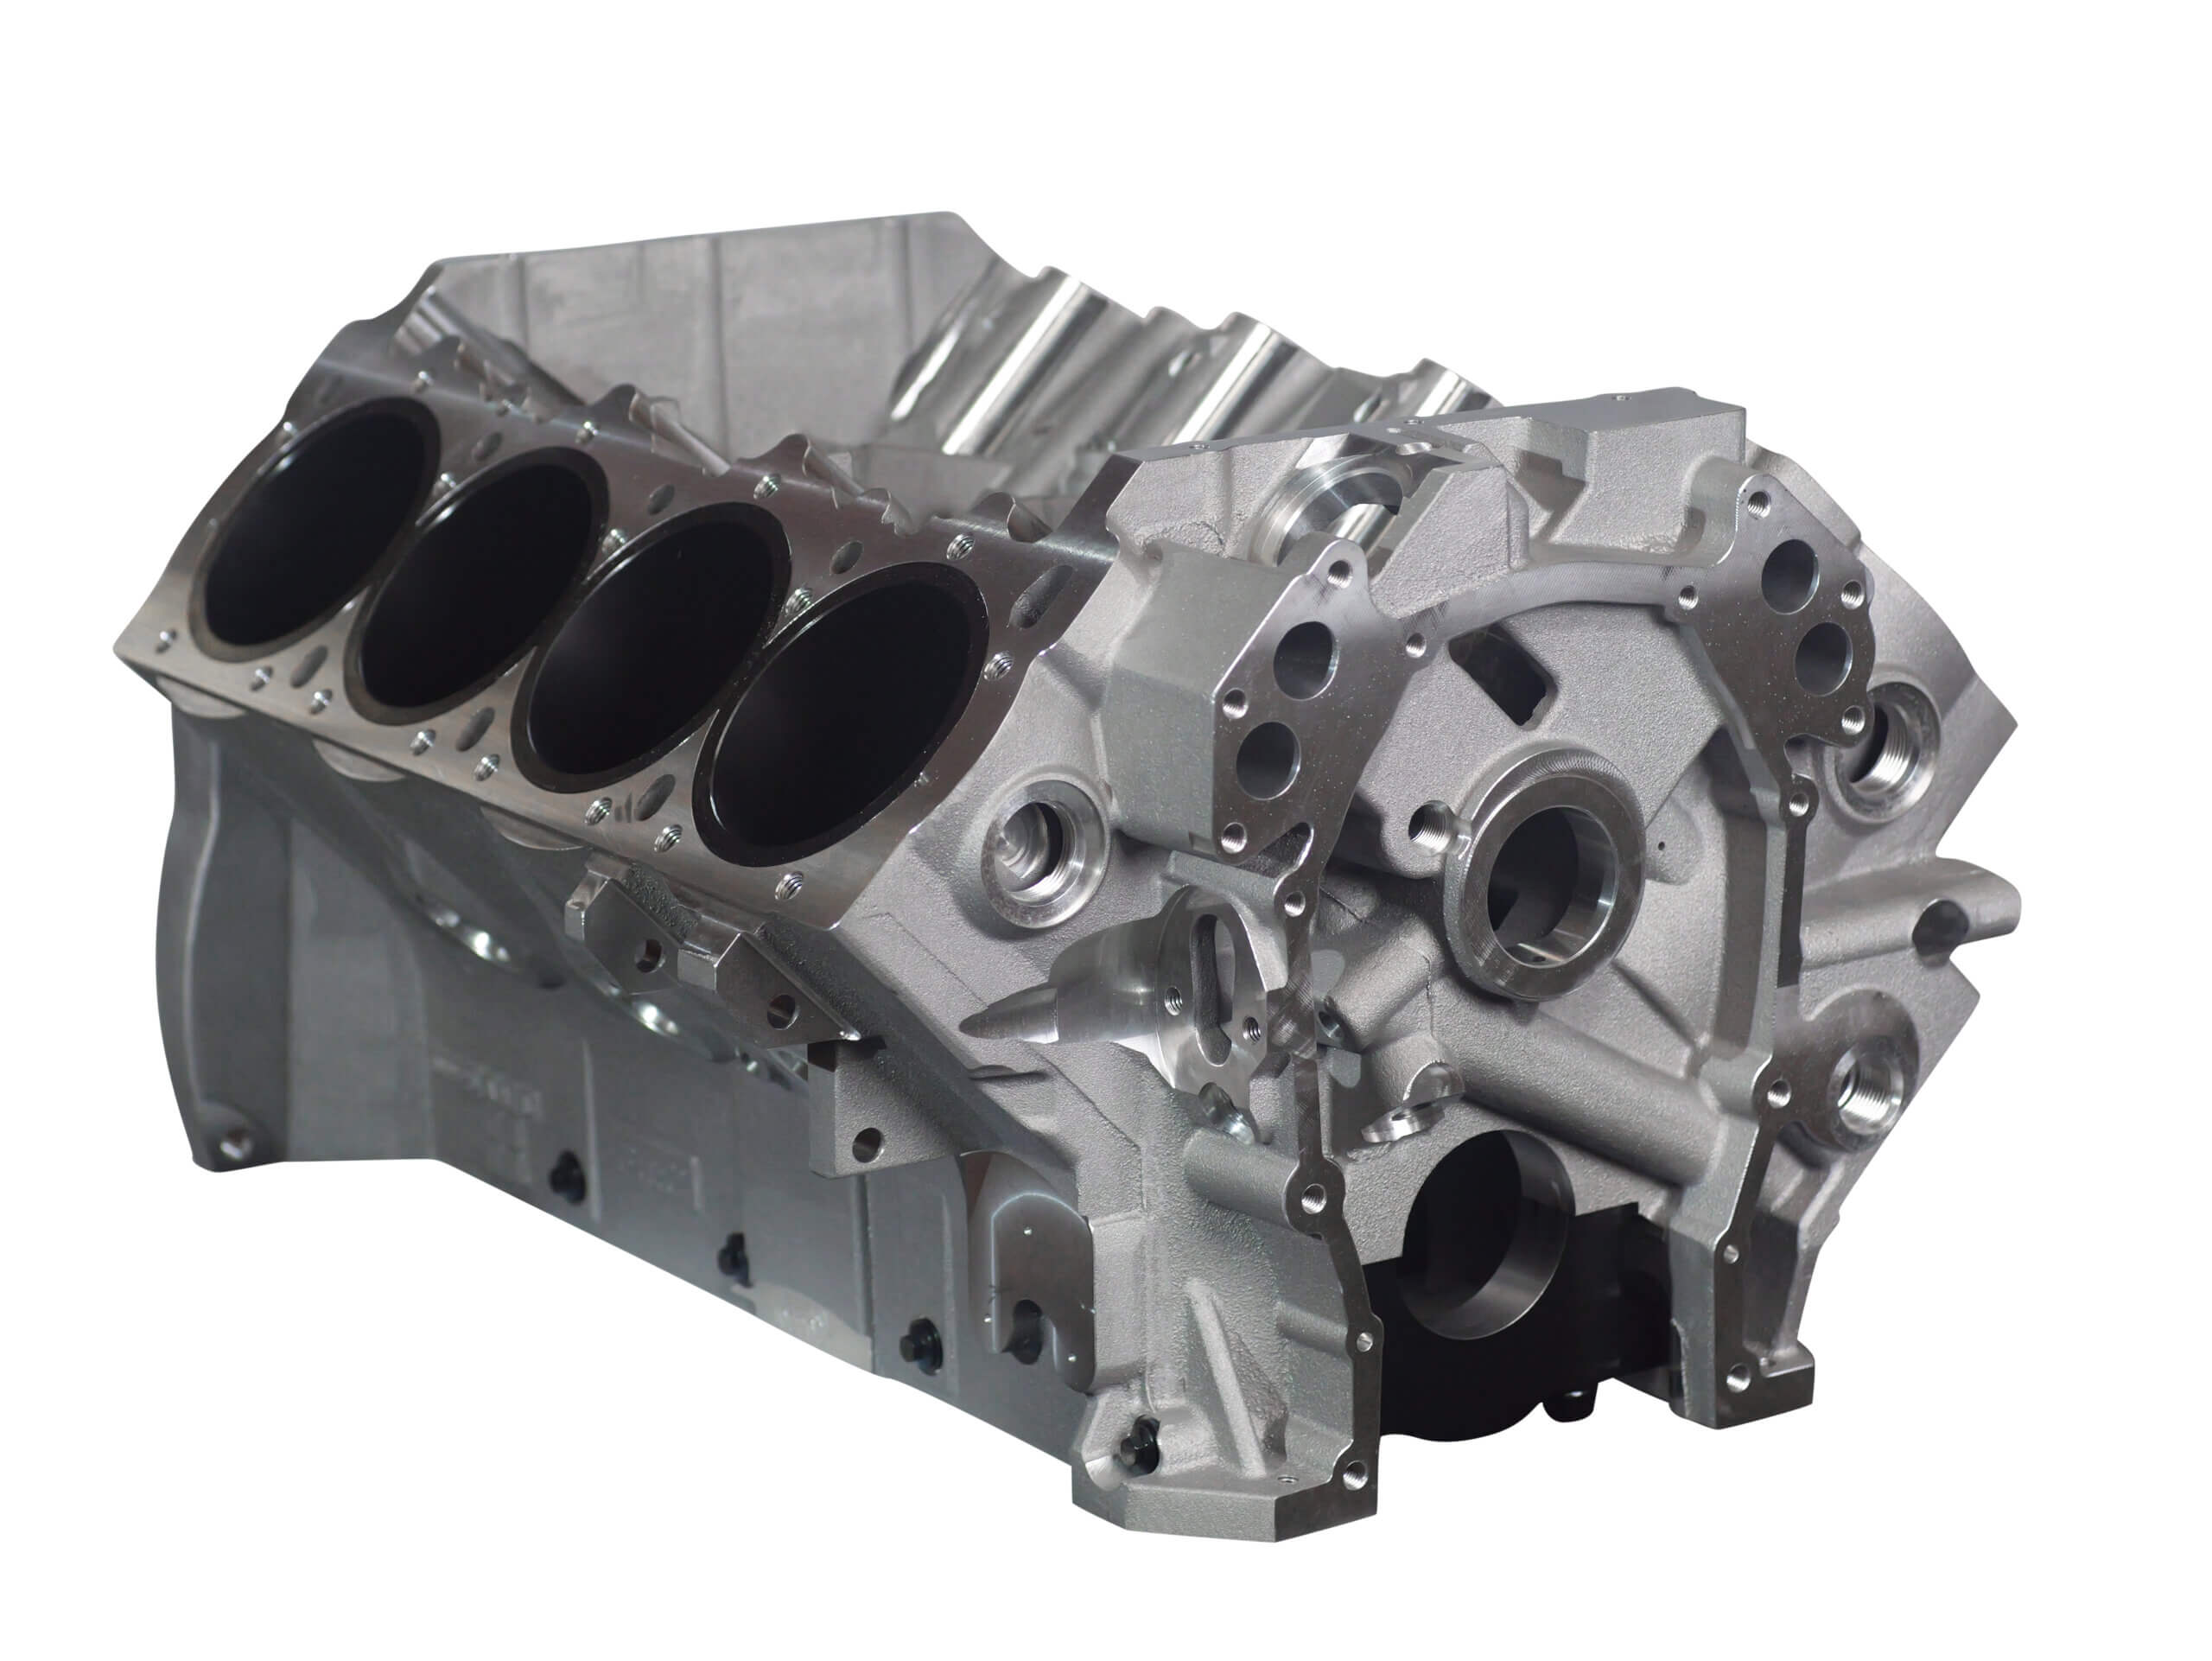 Bill Mitchell Products 440 Wedge 357T6 Aluminum Engine Block 440 Wedge Block, 10.720"Deck, 4.240" Bore. Standard Cam,.904" Lifters (includes, Screw in Freeze plugs, Screw in Cam plug, All dowel pins and Pipe plugs) 088550